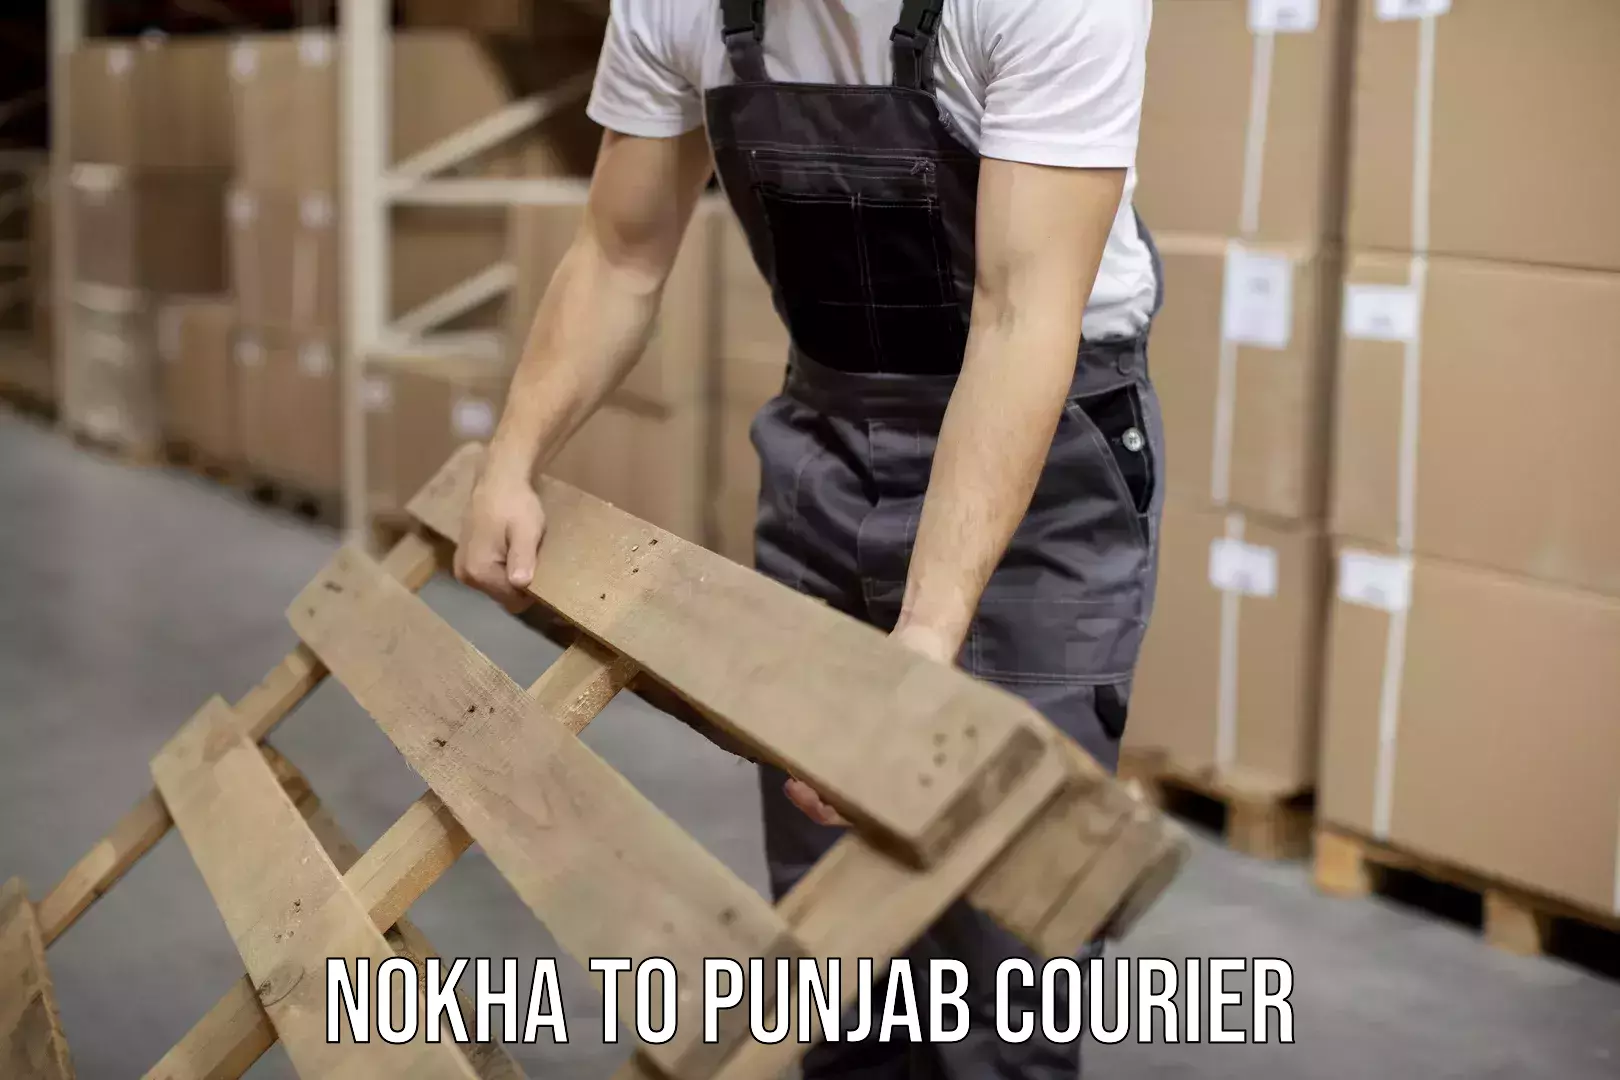 End-to-end delivery Nokha to Punjab